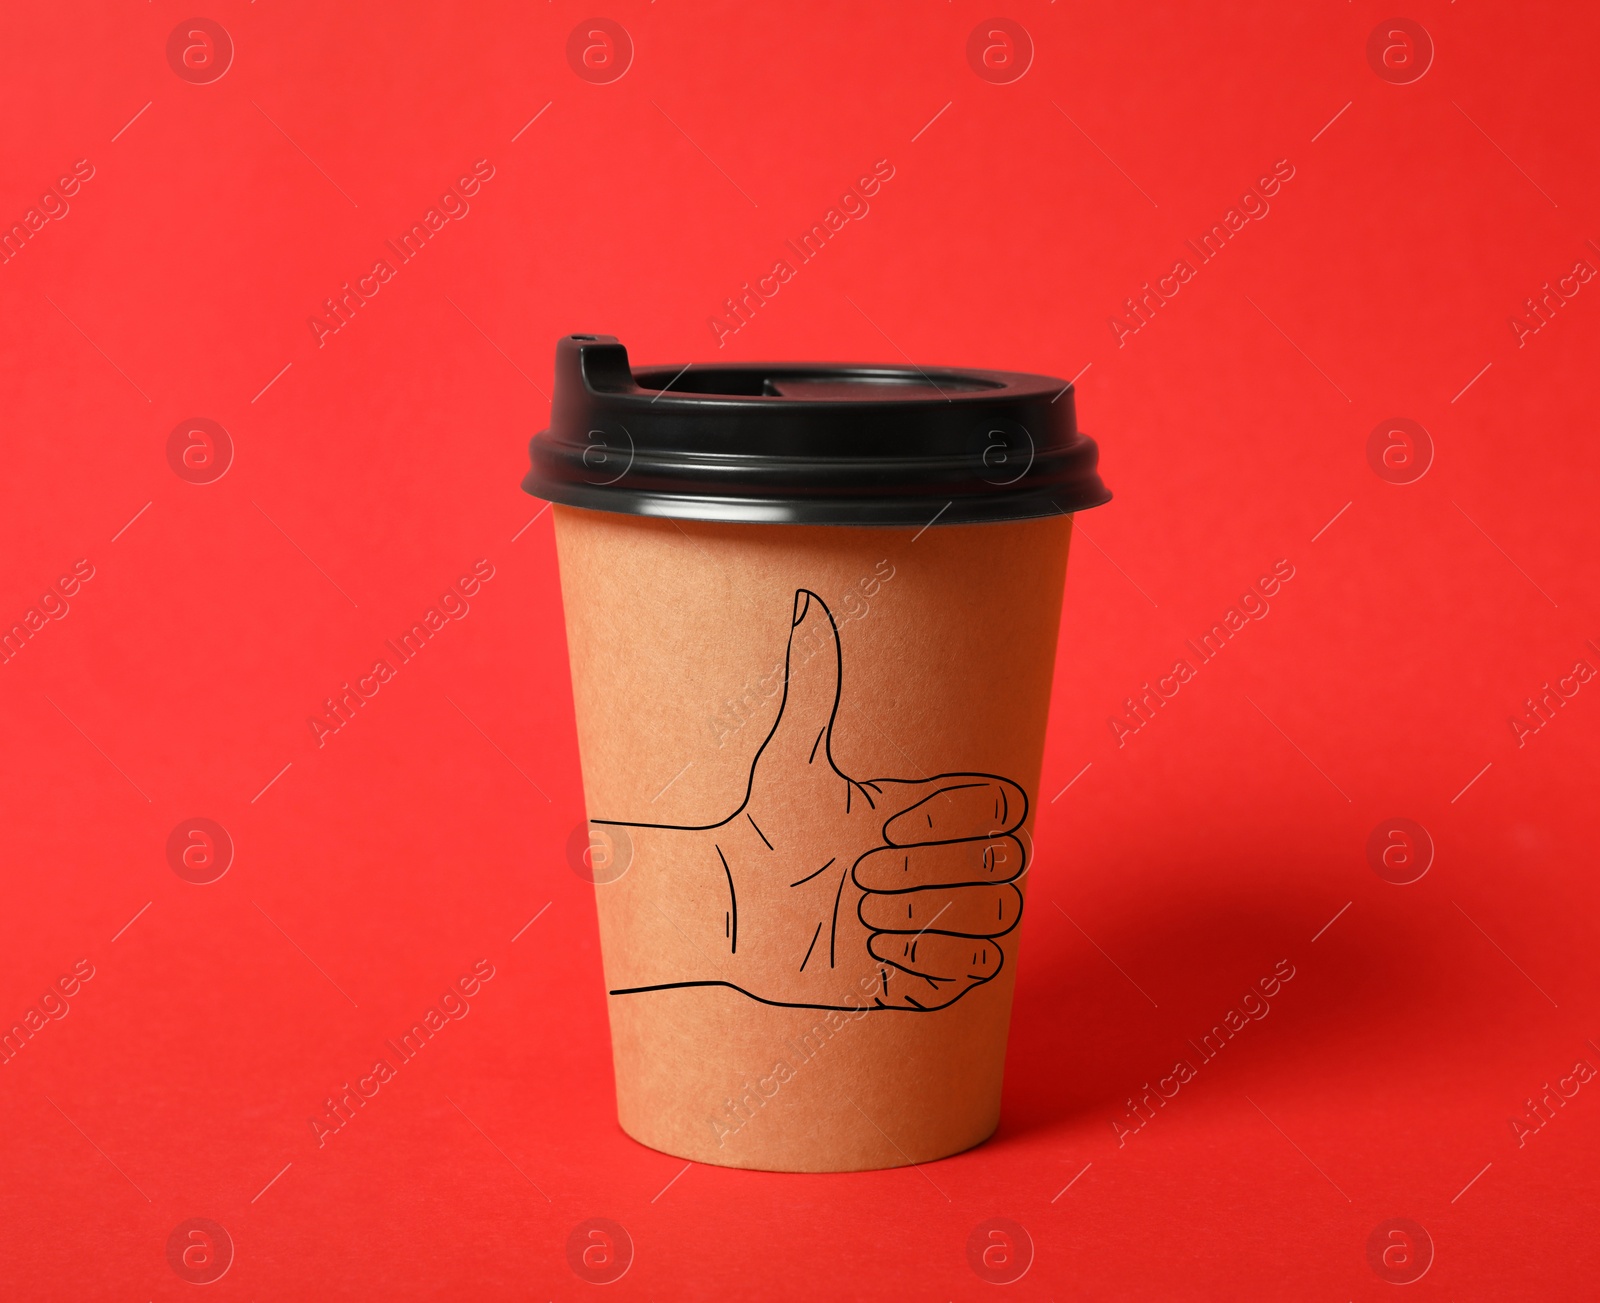 Image of Takeaway paper cup with thumbs up gesture drawing on red background